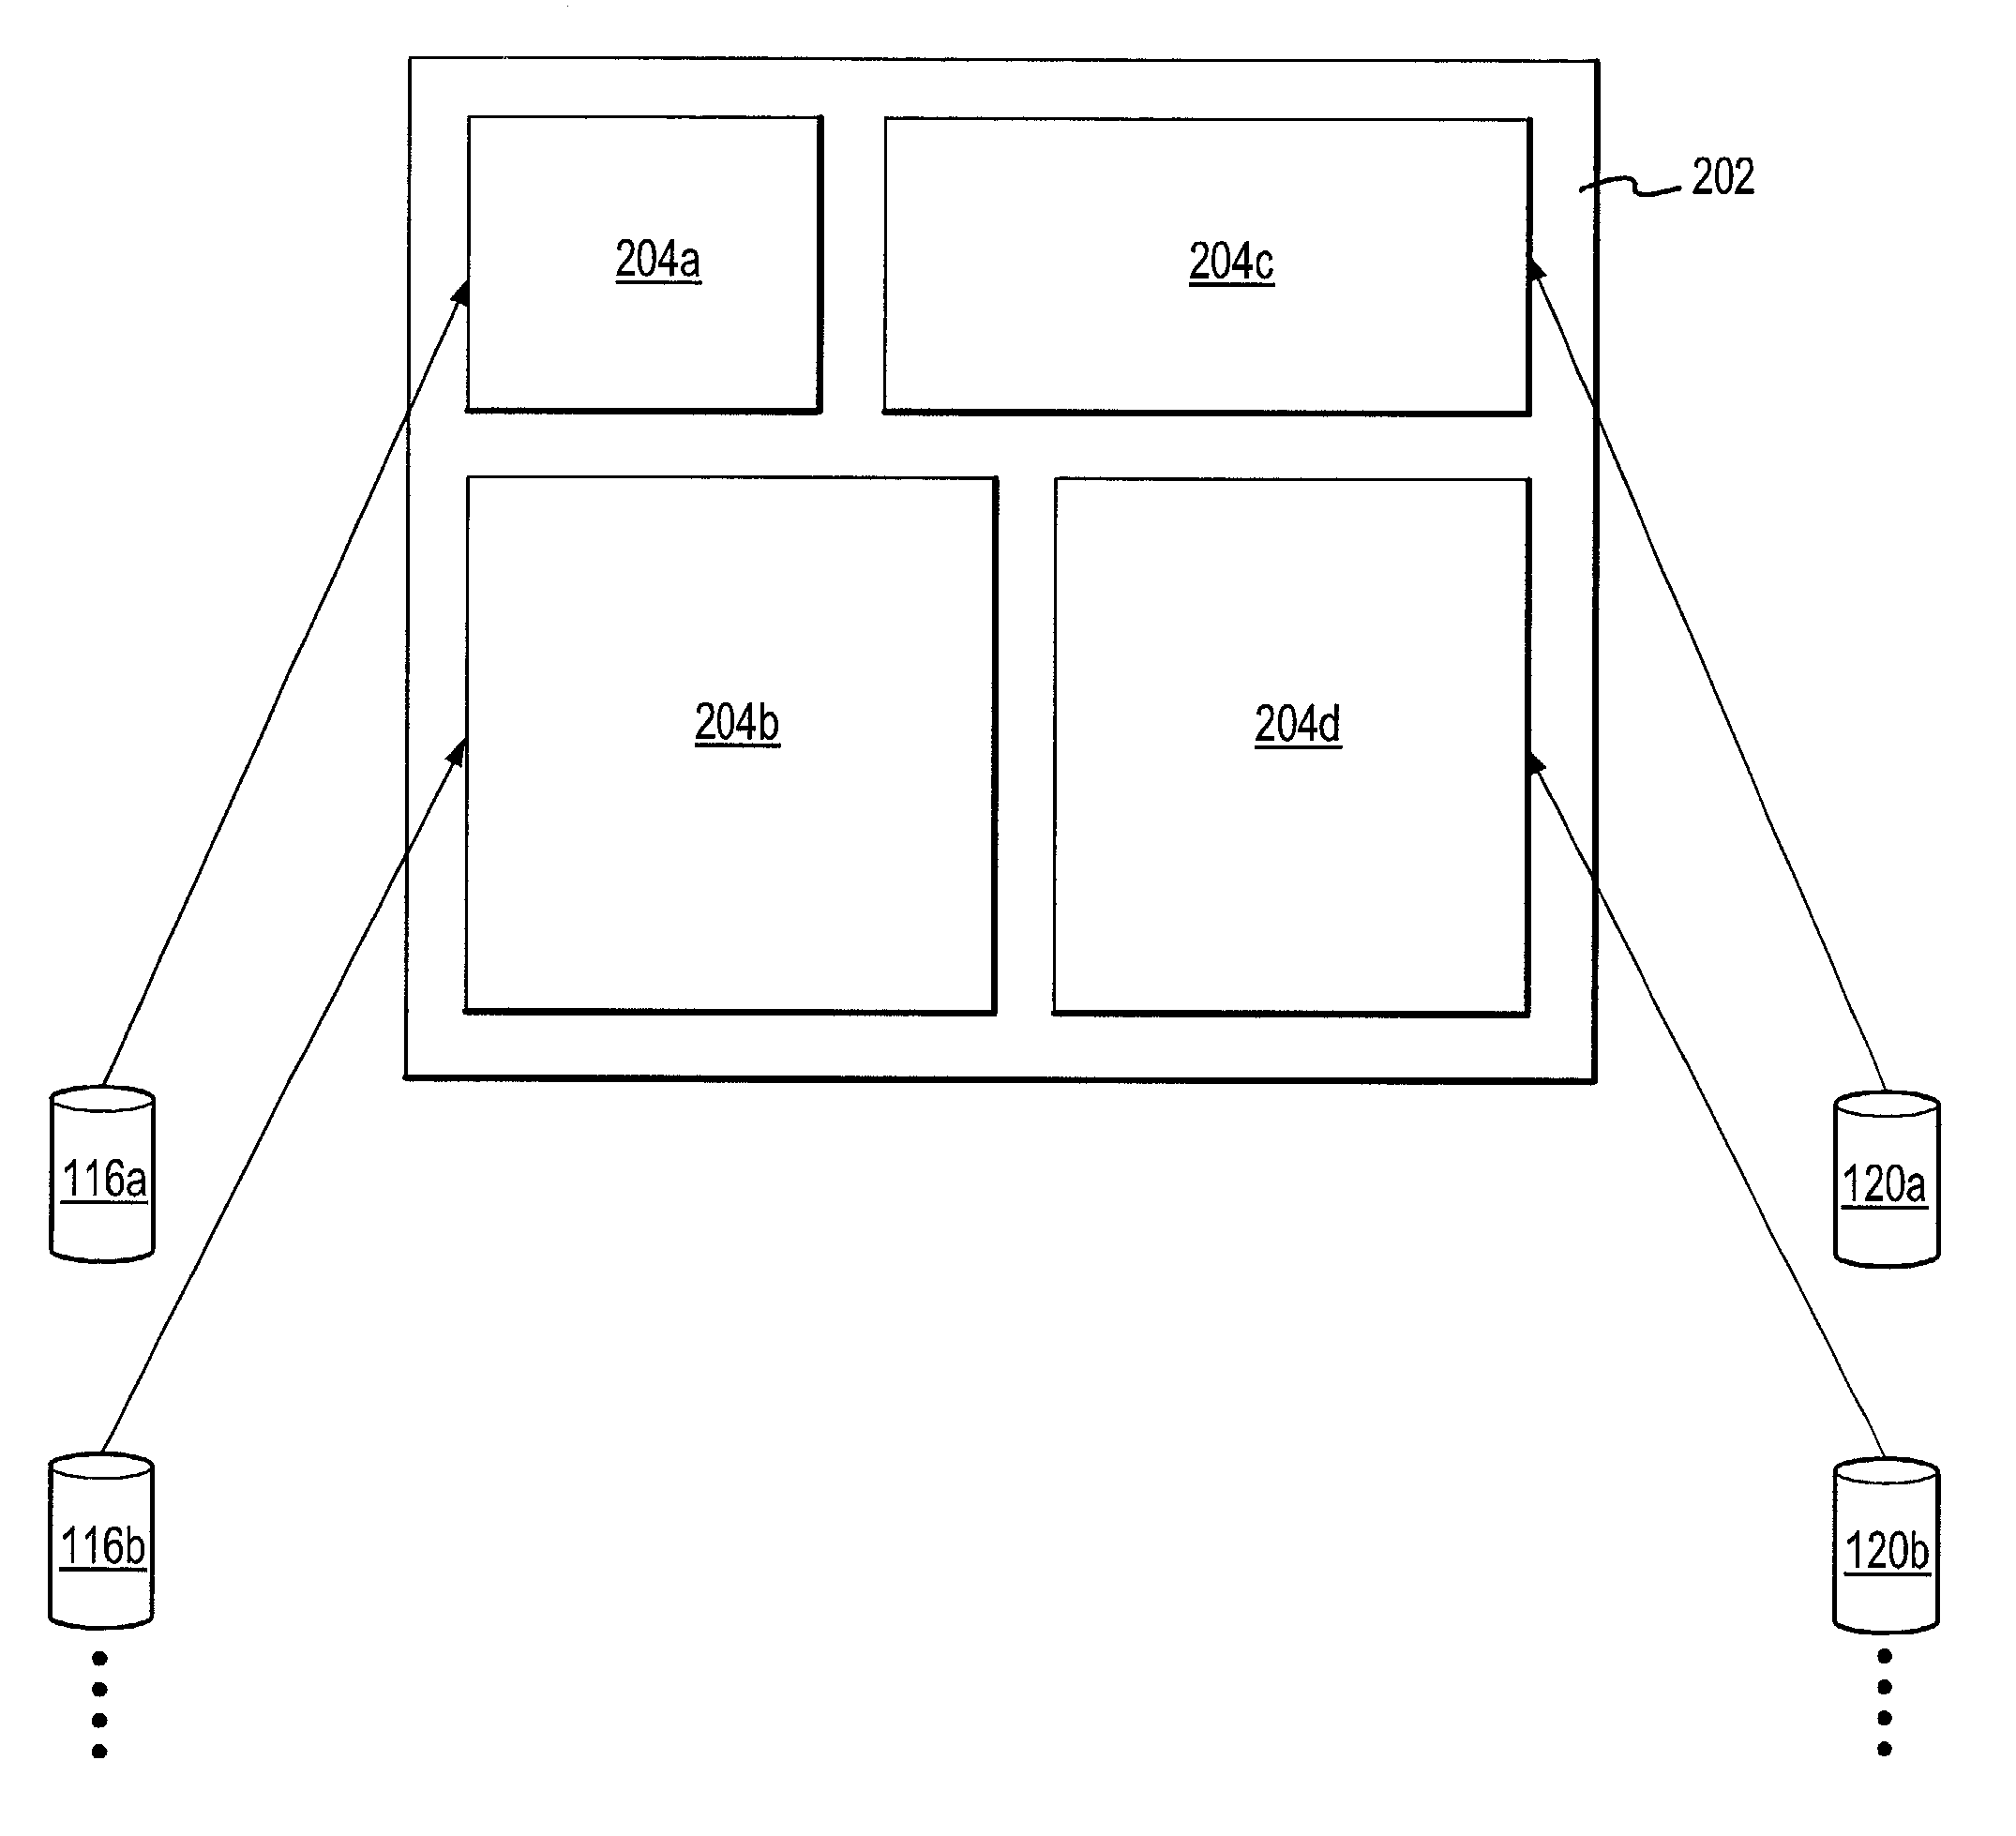 System and method for integrating public and private data